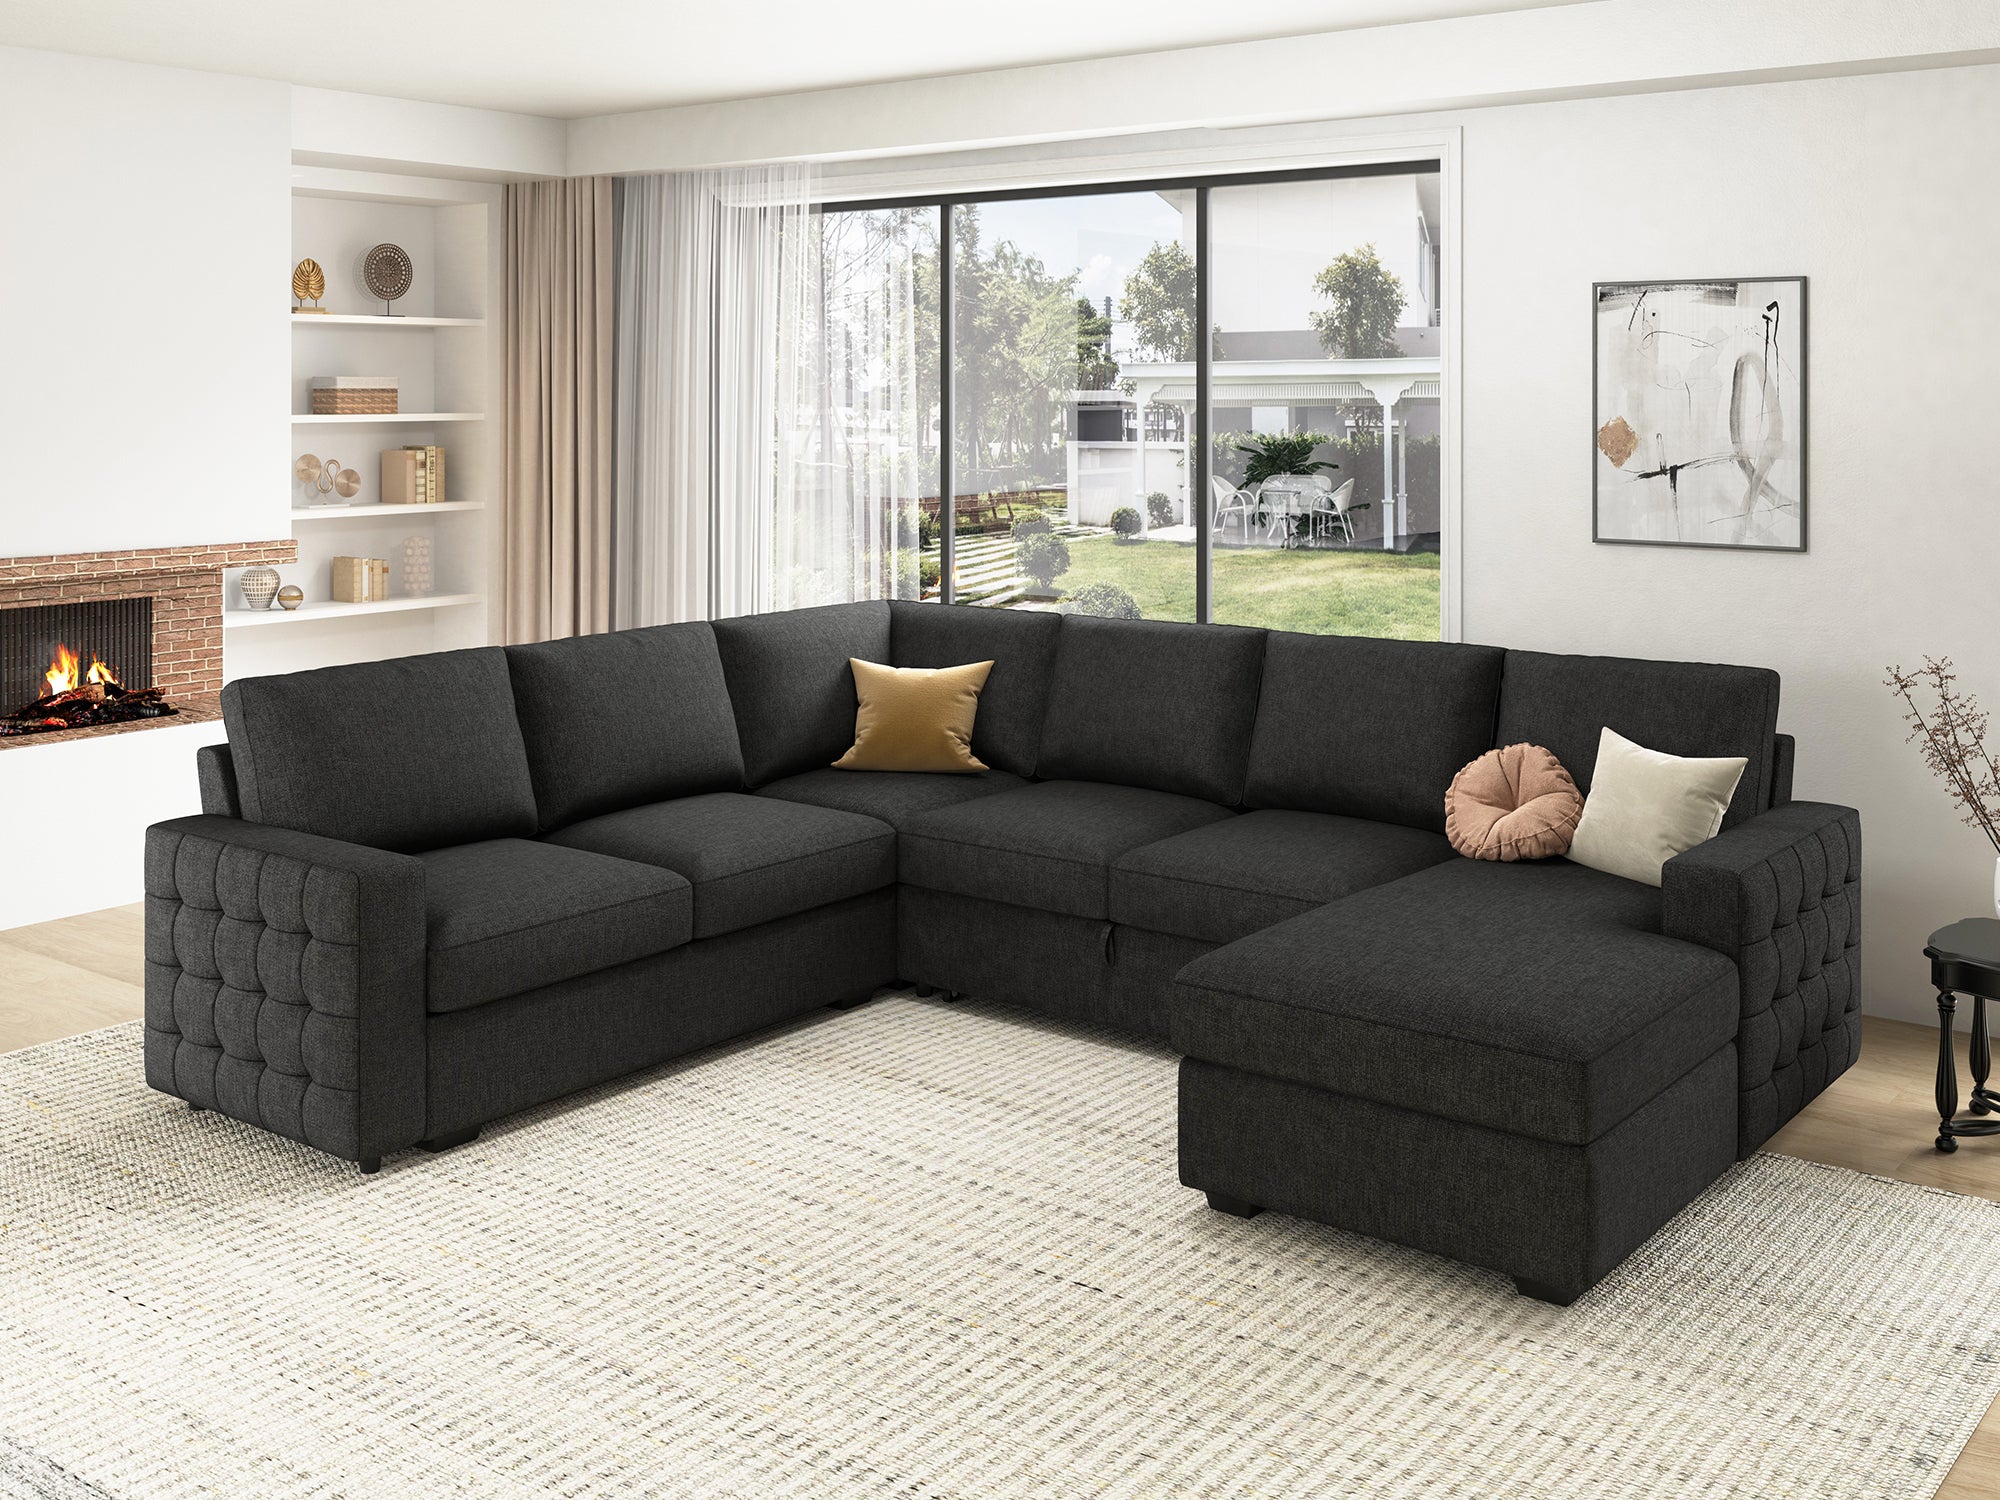 HONBAY 6-Seat U-Shaped Sectional Sofa Bed Sleeper Couch with Pull Out Bed & Storage Chaise